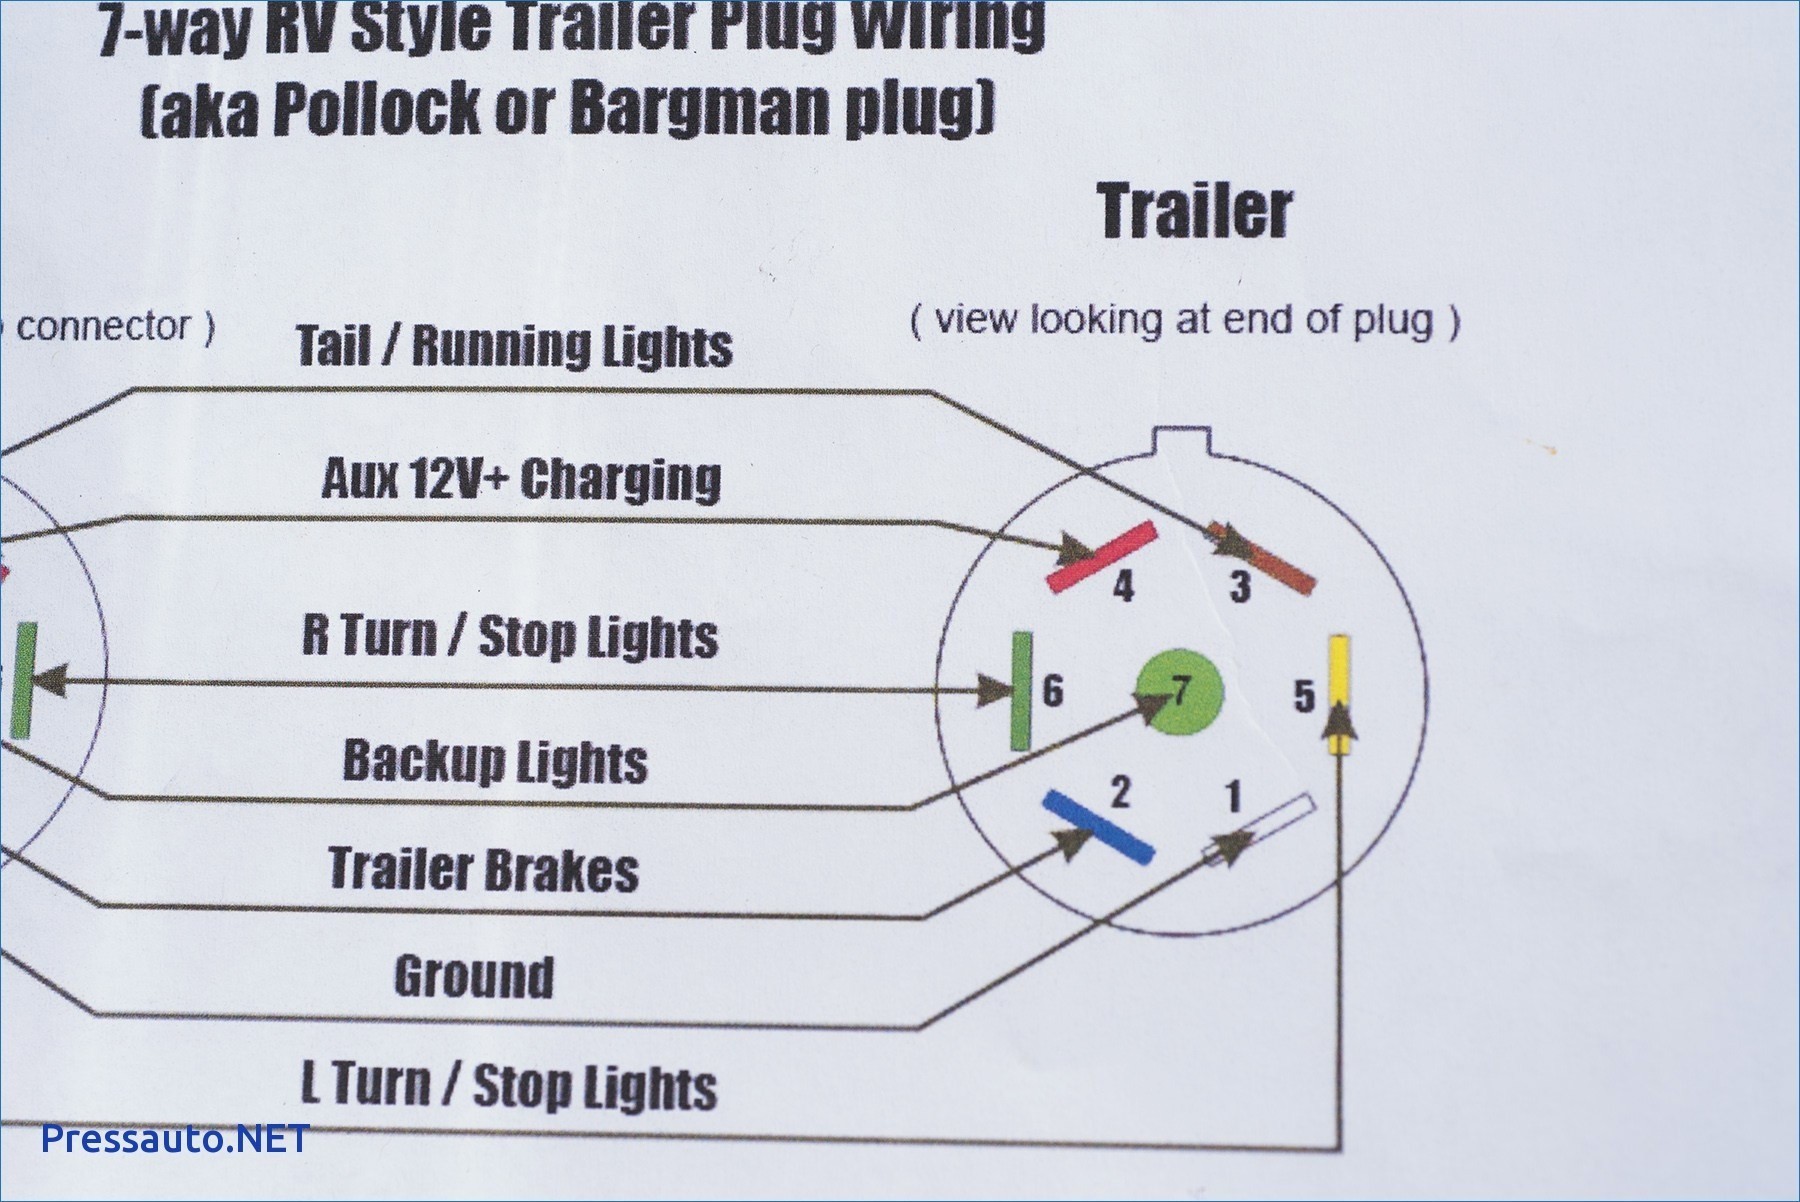 Wiring Diagram for Trailer Hitch Plug Valid Wiring Diagram for Venter Trailer Valid Magnificent Trailer Hitch